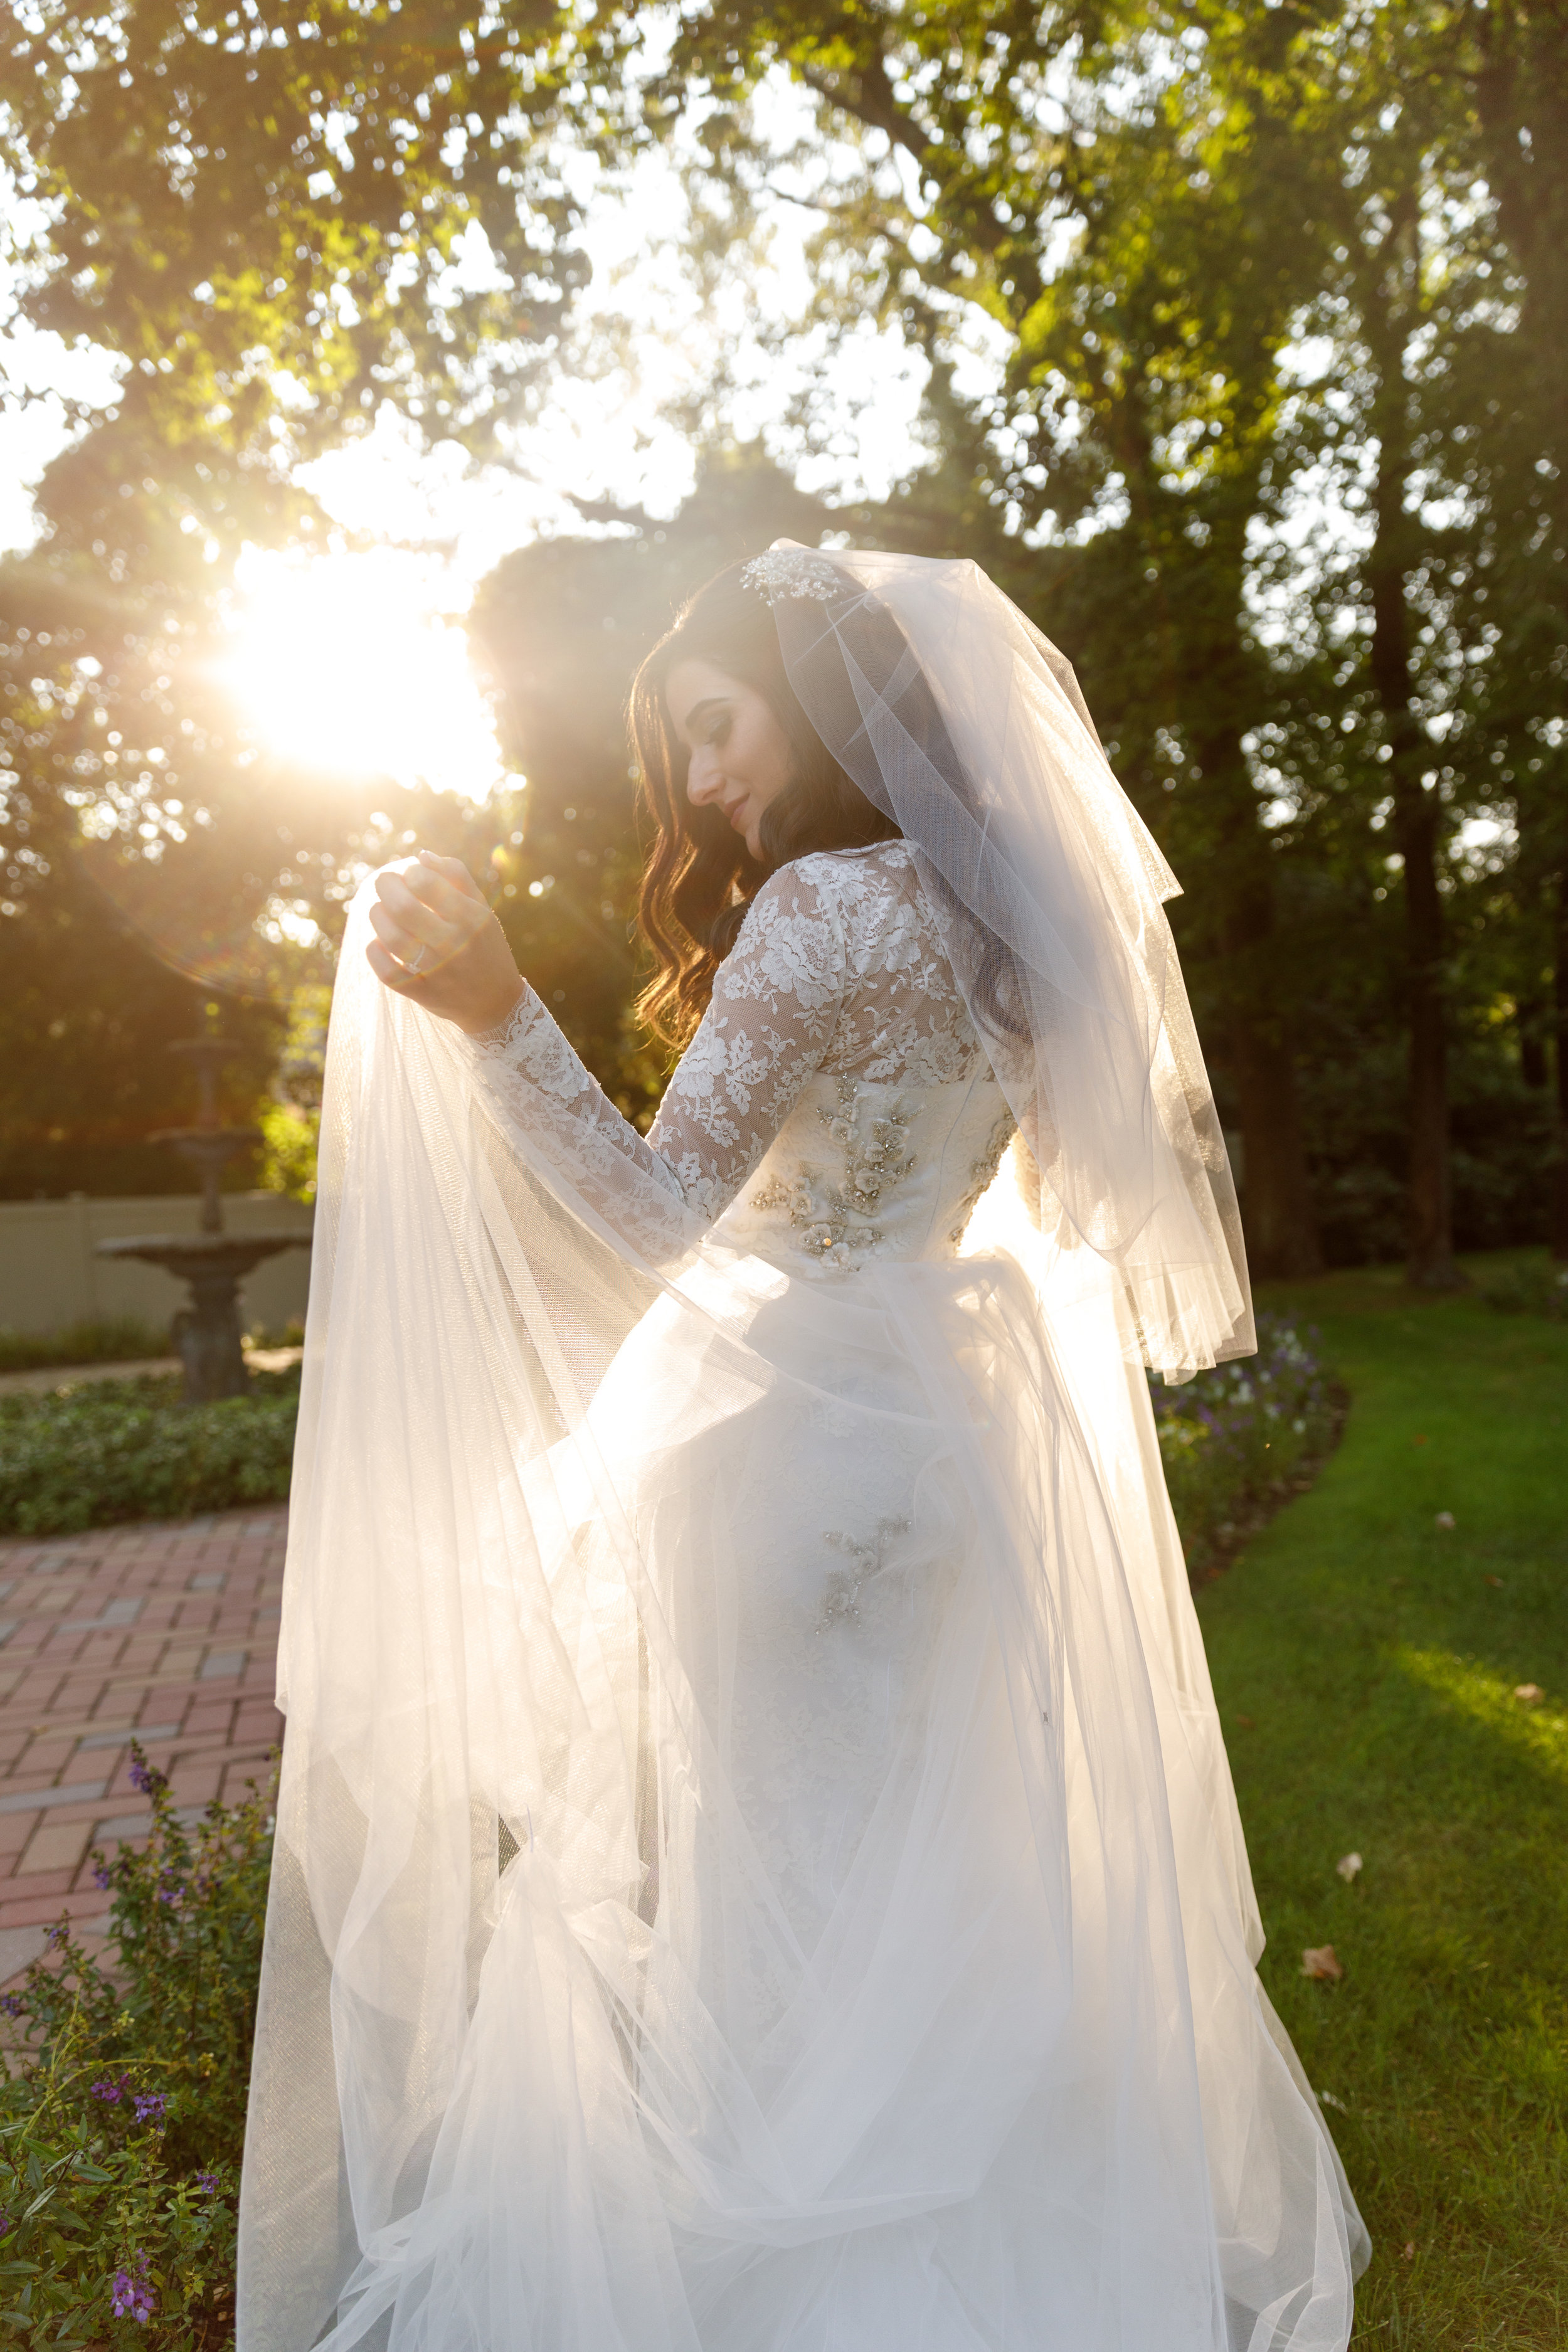 First Look At My Custom Raquel Couture Wedding Dress Esther Santer Fashion Blog NYC Street Style Blogger Outfit OOTD Trendy Fall Ceremony Portrait Photography Bride Groom Beautiful Outdoor Reception Dancing Tulle Train  Beading White Lace Inspiration.JPG